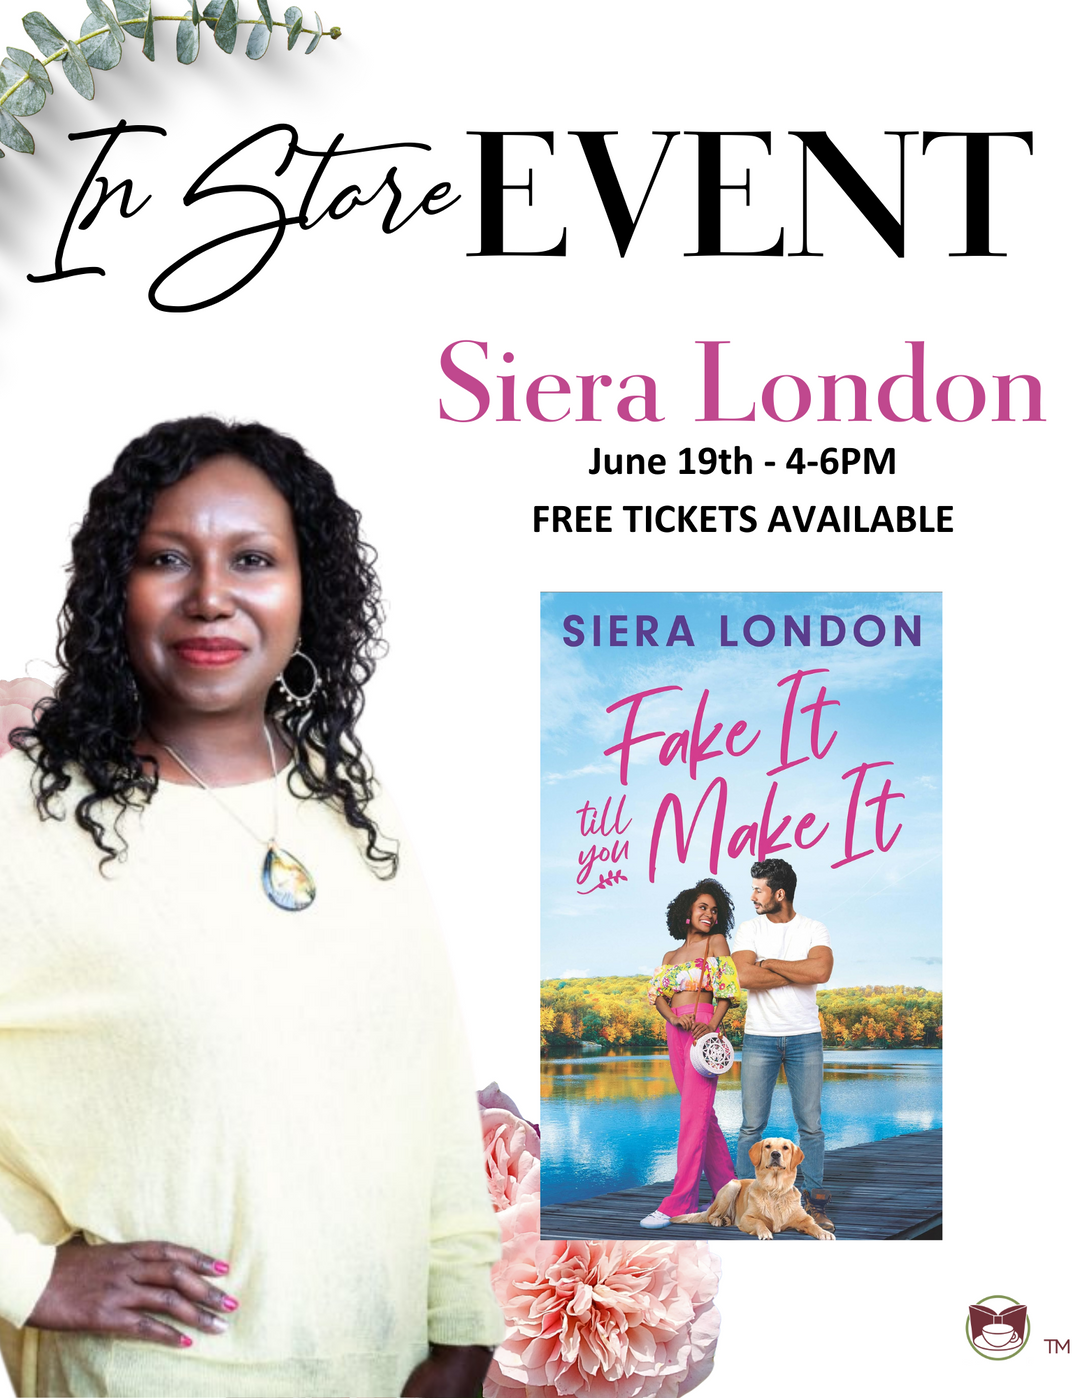 Siera London Signing Event Ticket - June 19th - 4-6PM